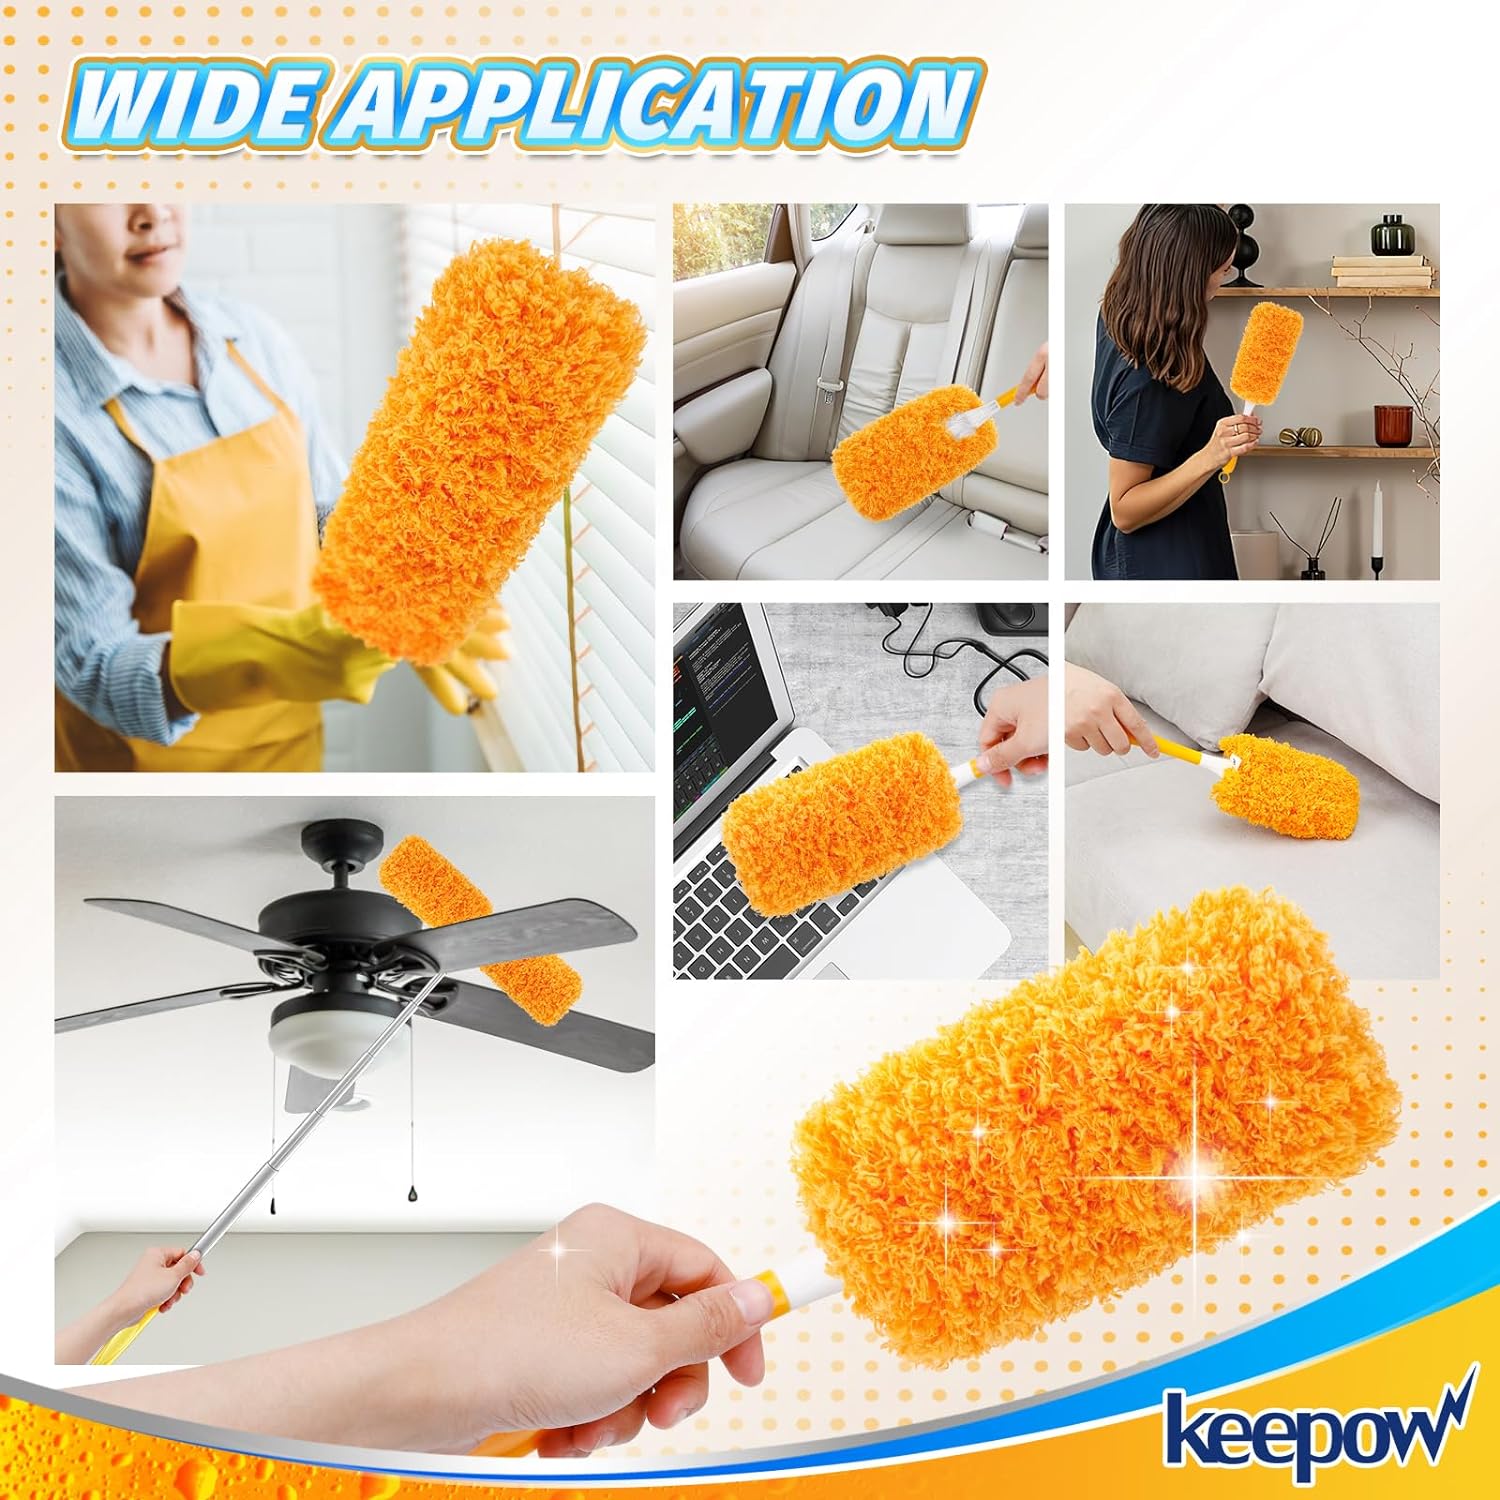 KEEPOW  5704M Reusable Microfiber Duster Refill Compatible with Swiffer Hand Duster, Heavy Duty Duster Refills, 2 Pack (Handle is Not Included)